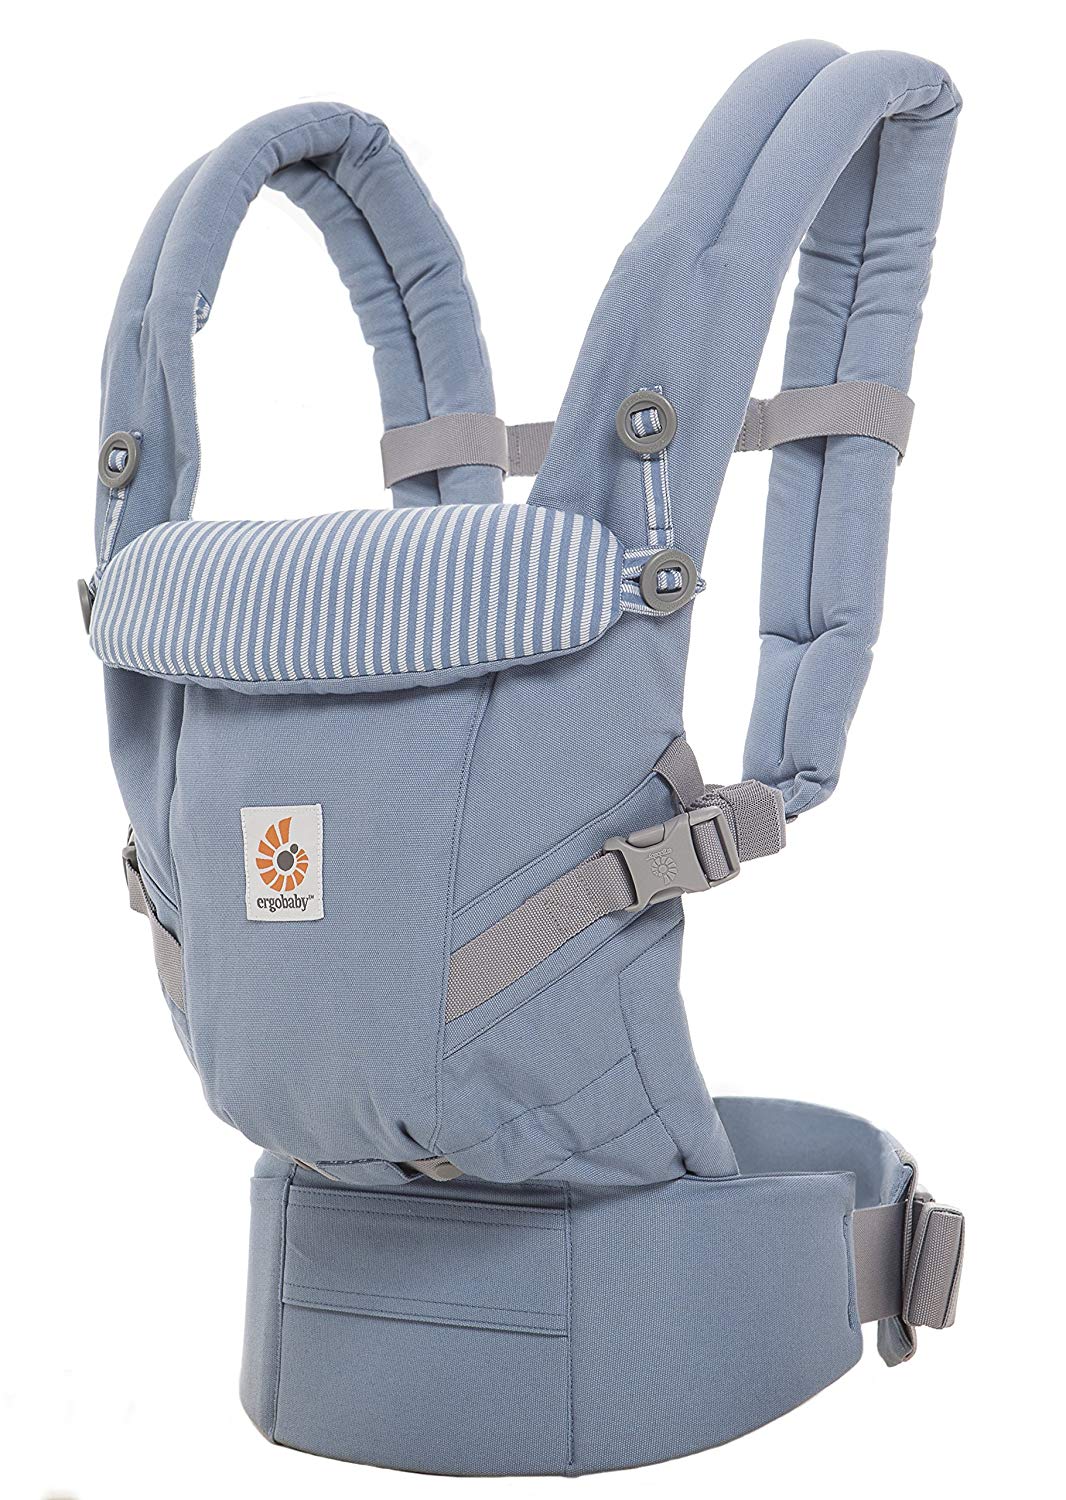 Ergobaby baby carrier for newborns, Adapt Grey 3-in-1 baby carrier system Ergonomic, baby carrier bag, front carrier